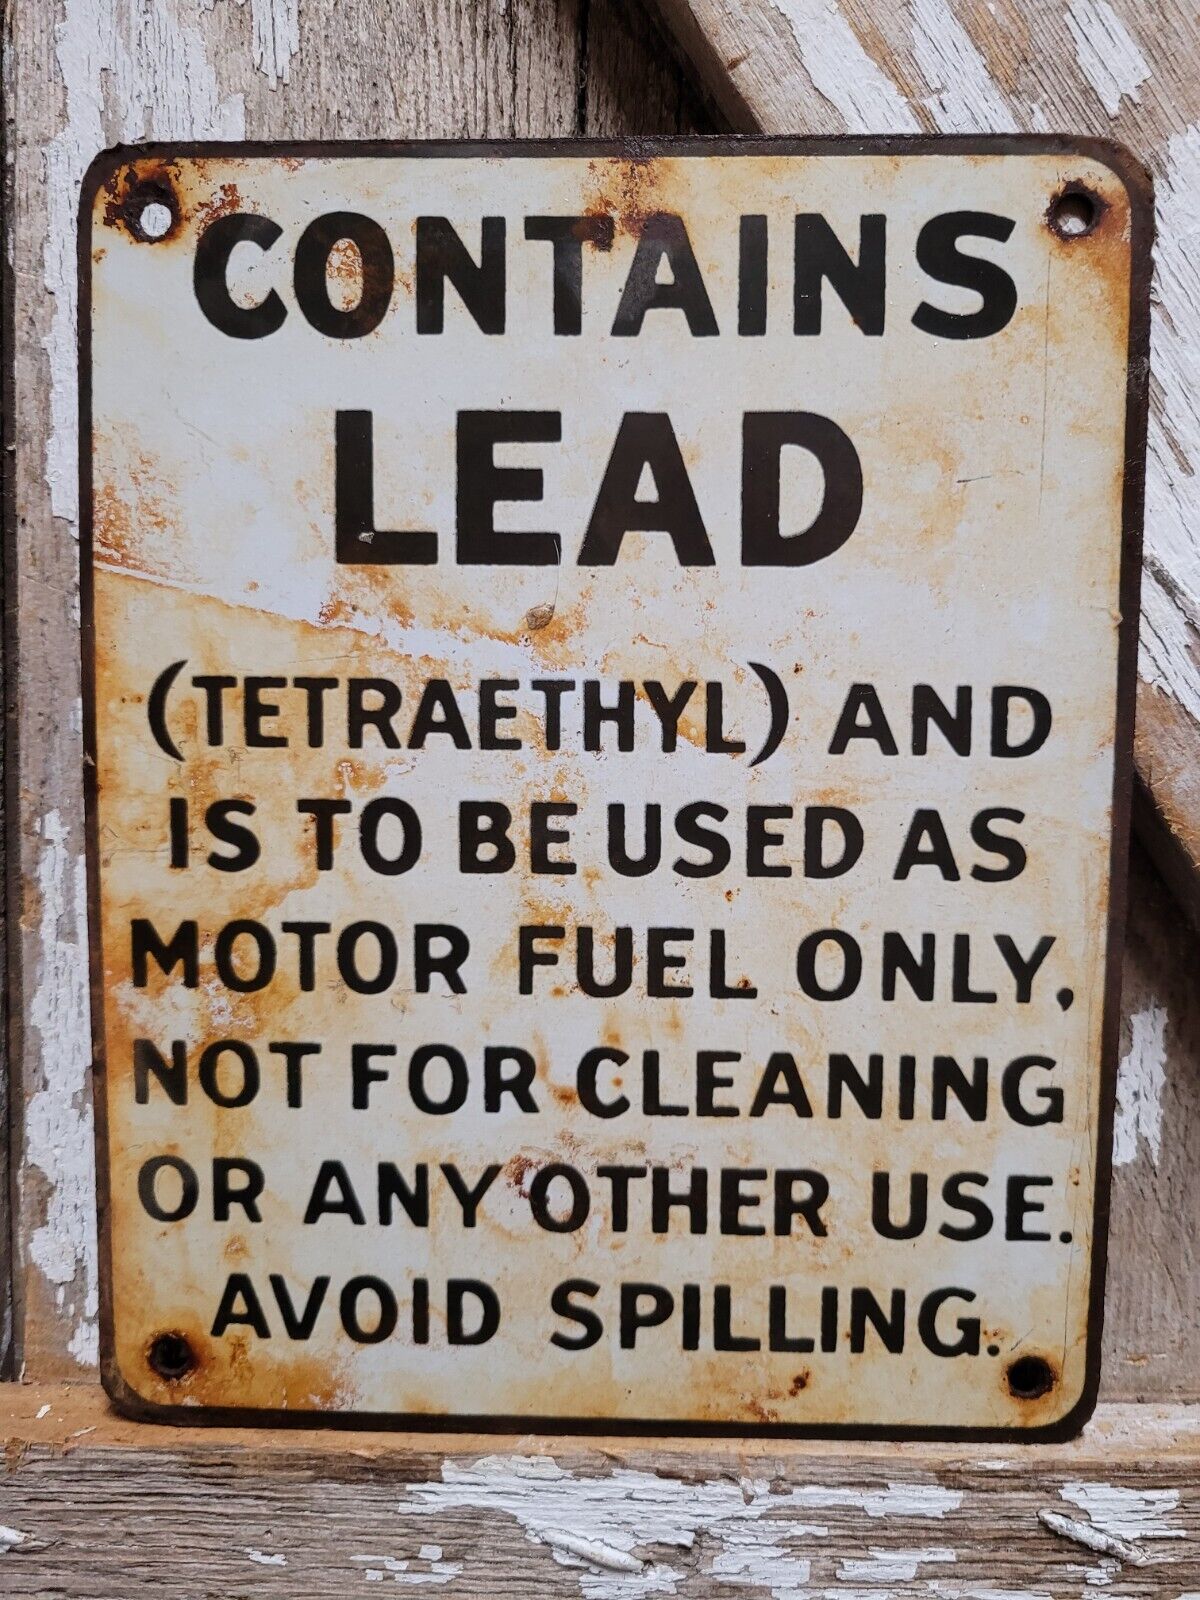 VINTAGE GAS PUMP PORCELAIN SIGN CONTAINS LEAD TETRAETHYL WARNING GAS OIL STATION